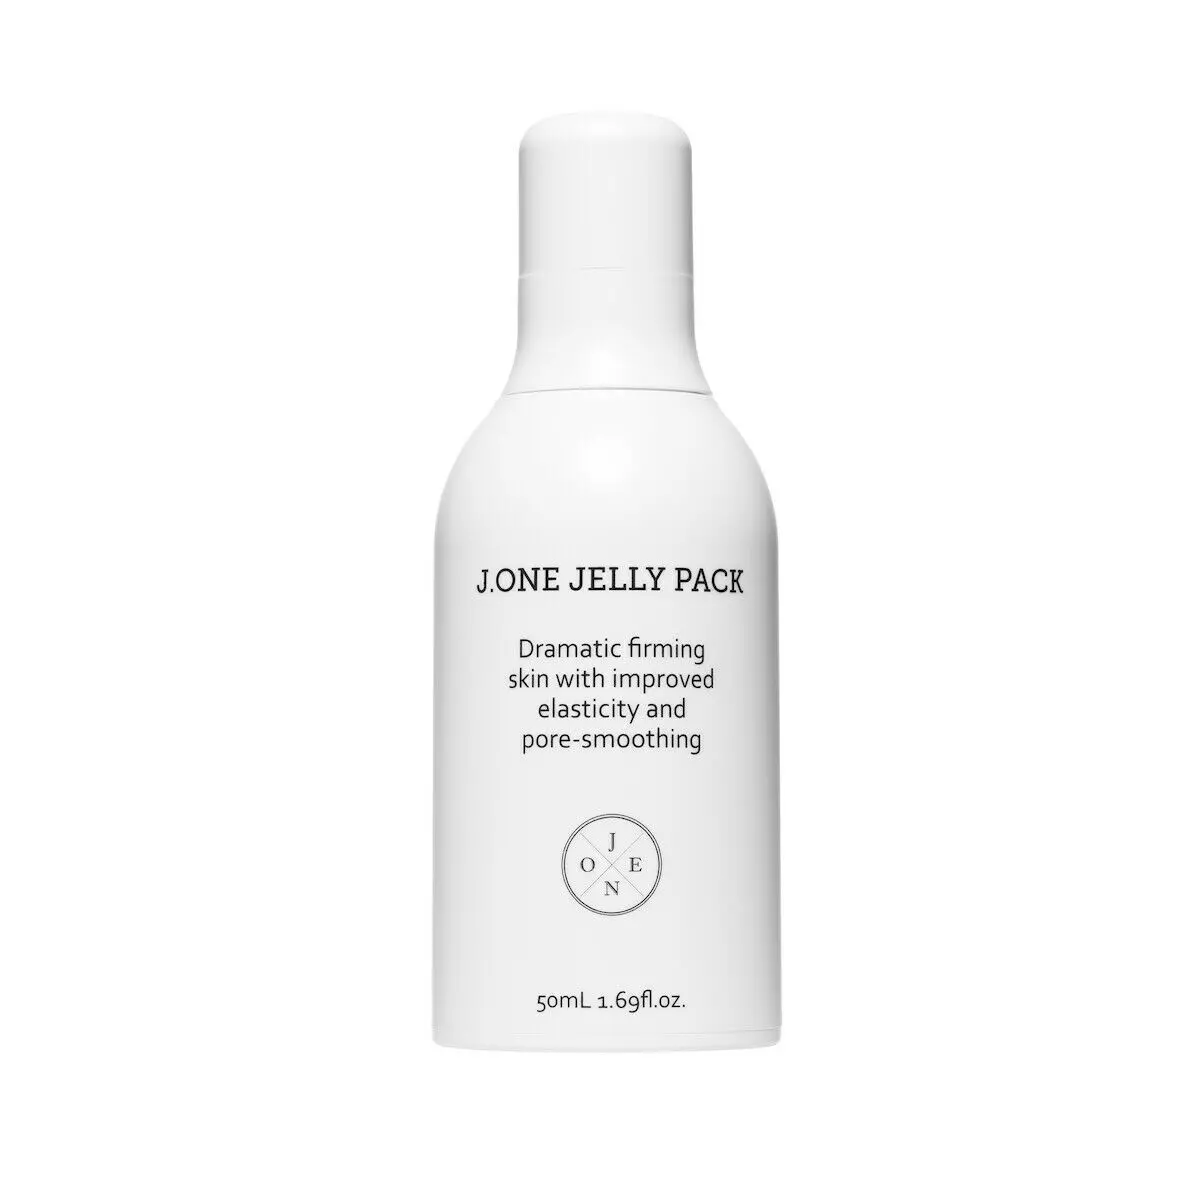 J One Jelly Pack For Dramatic Firming Skin Primer Glambot Com Best Deals On Instagram Picks Cosmetics